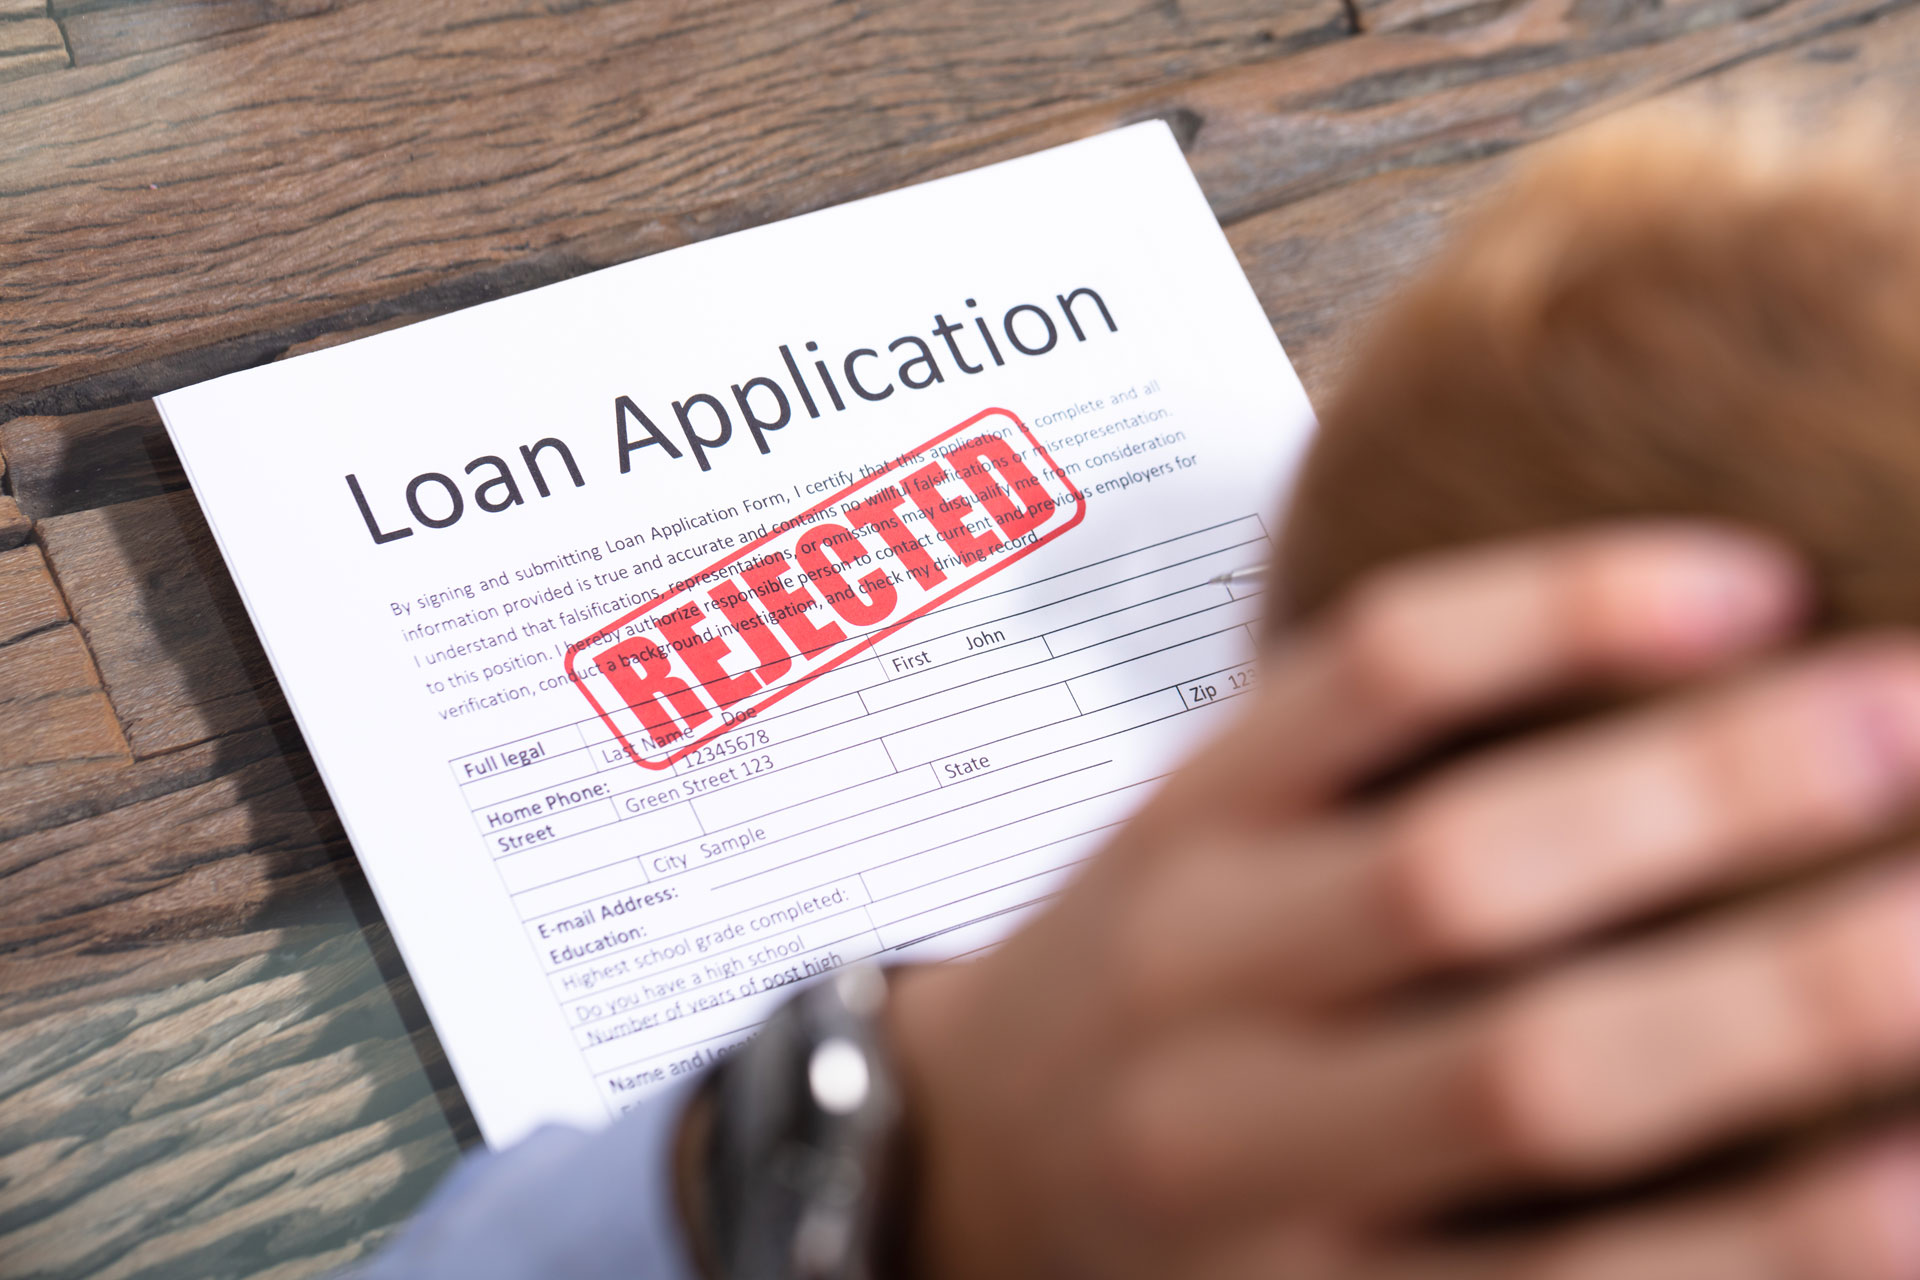 A rejected loan application signifying the possible reasons a money lender in Singapore may not approve a loan